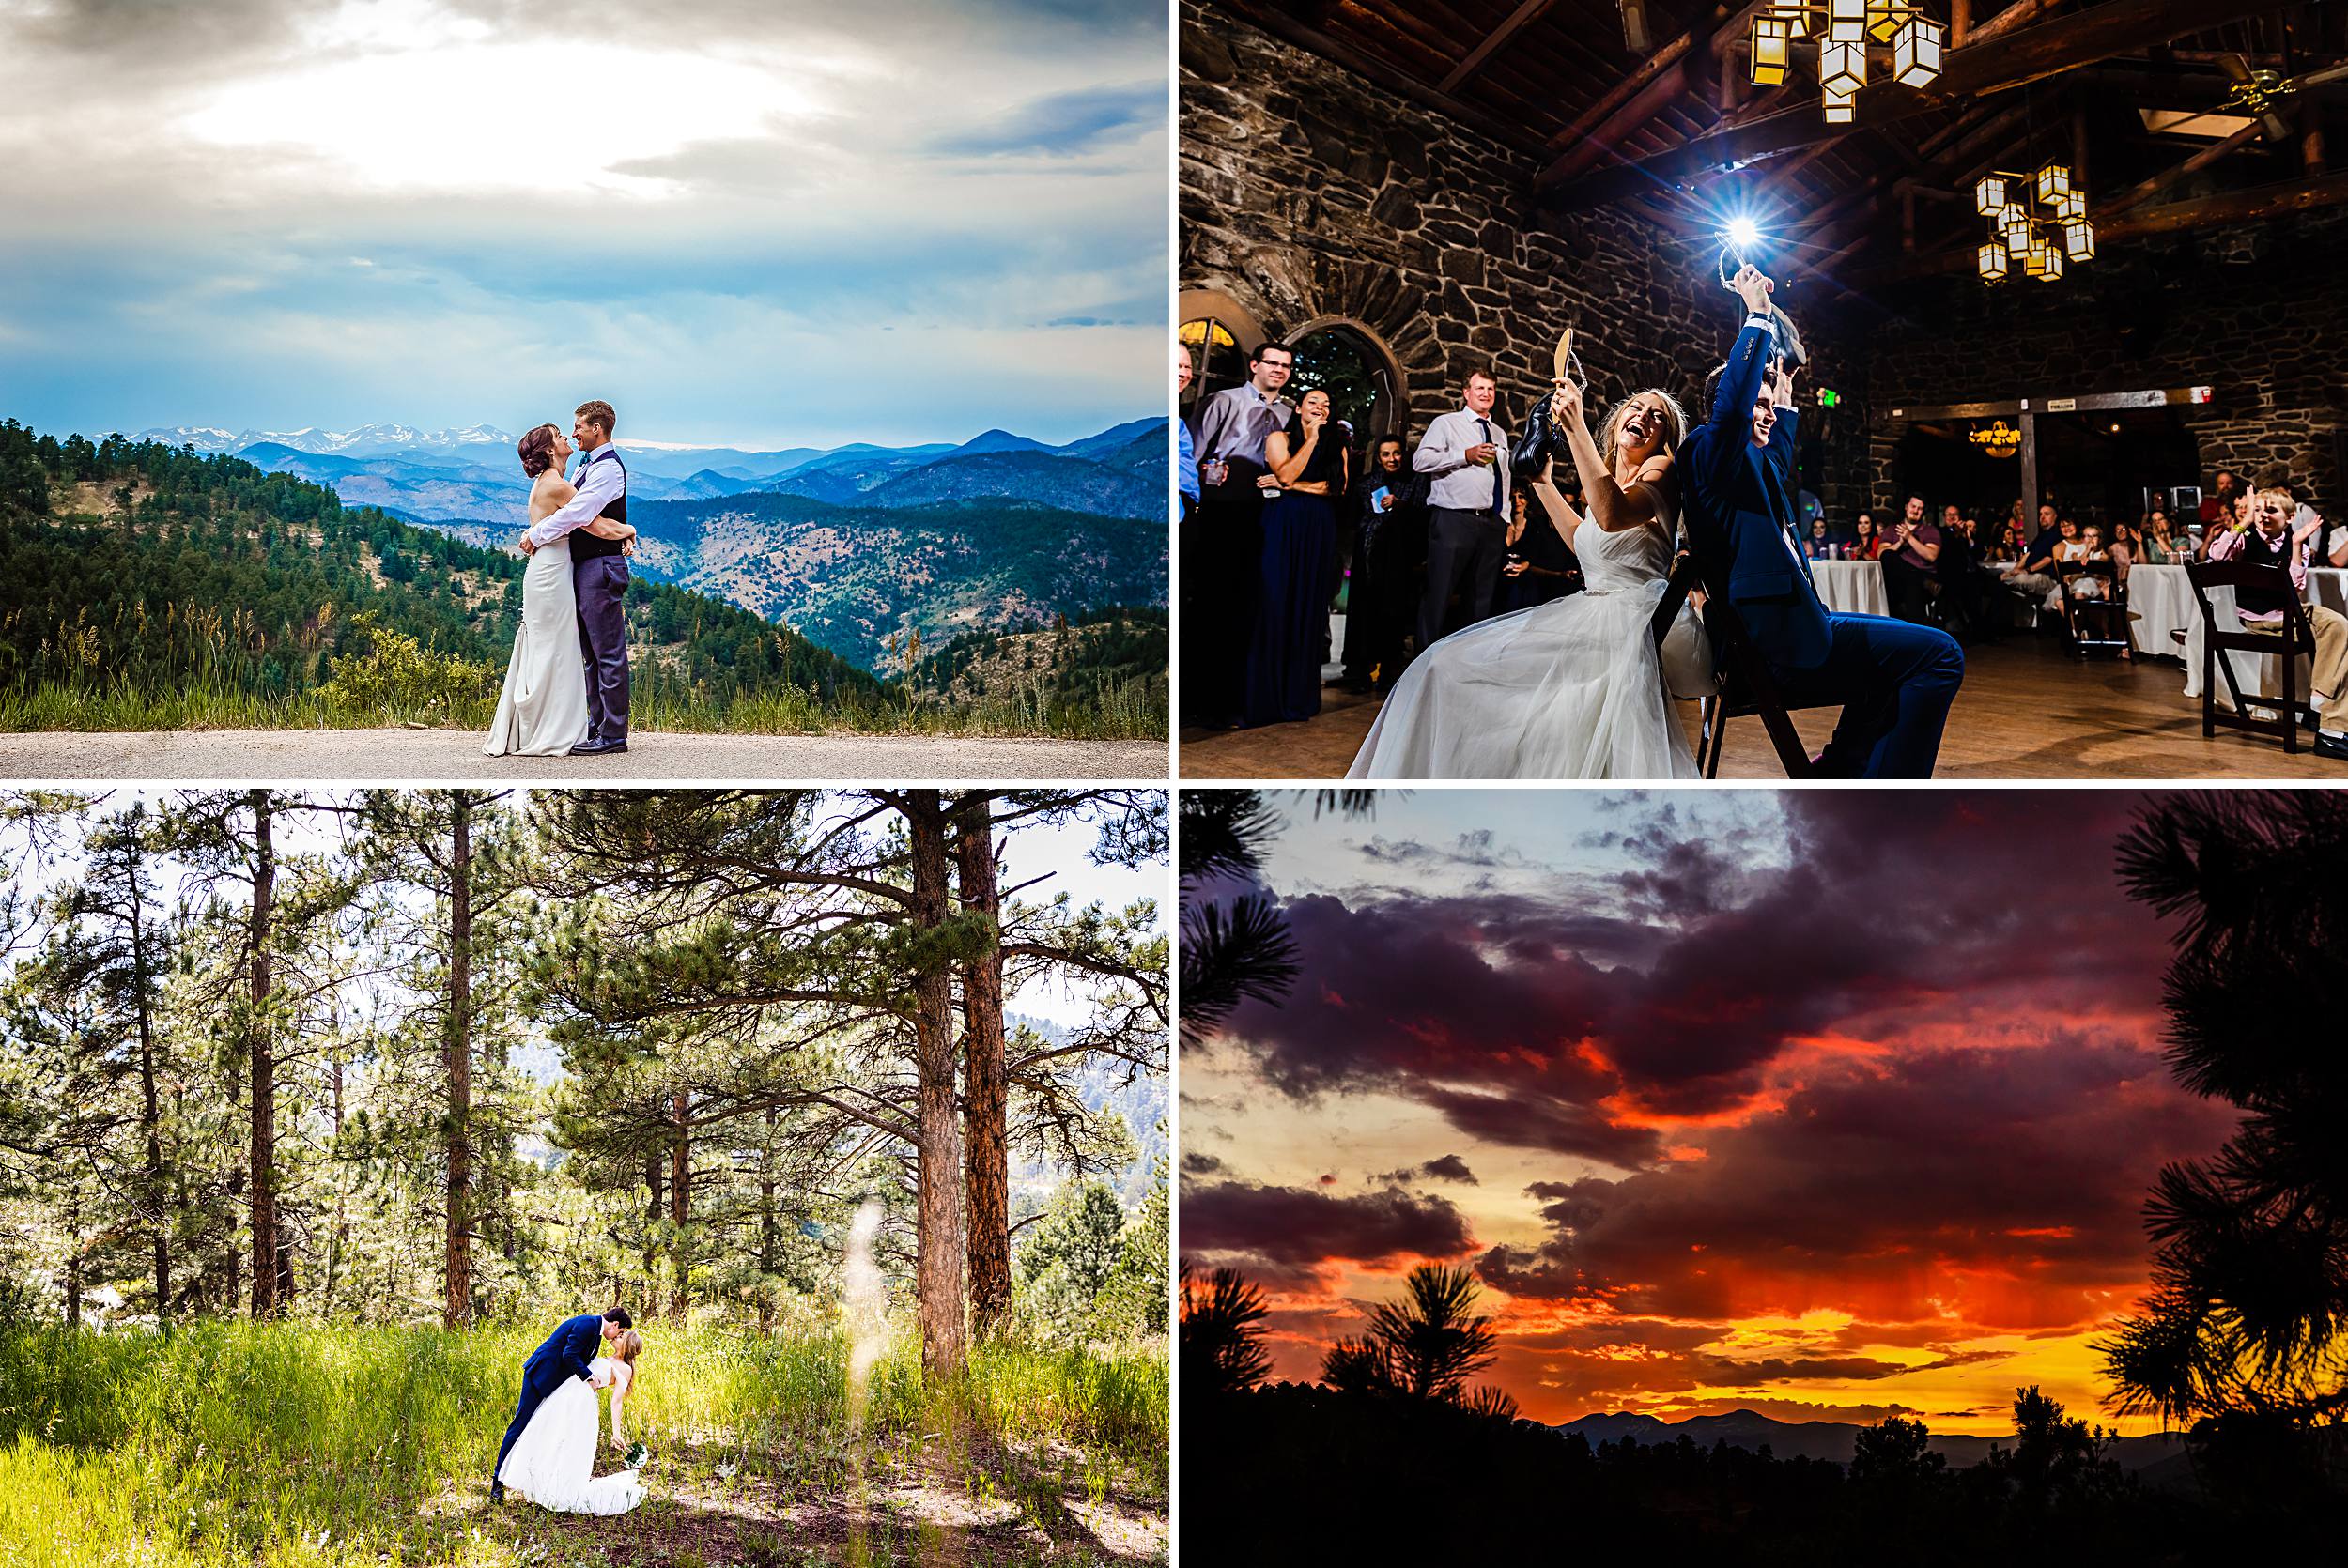 Chief Hosa Lodge is an affordable wedding venue in Denver with a mountain and rustic feel.